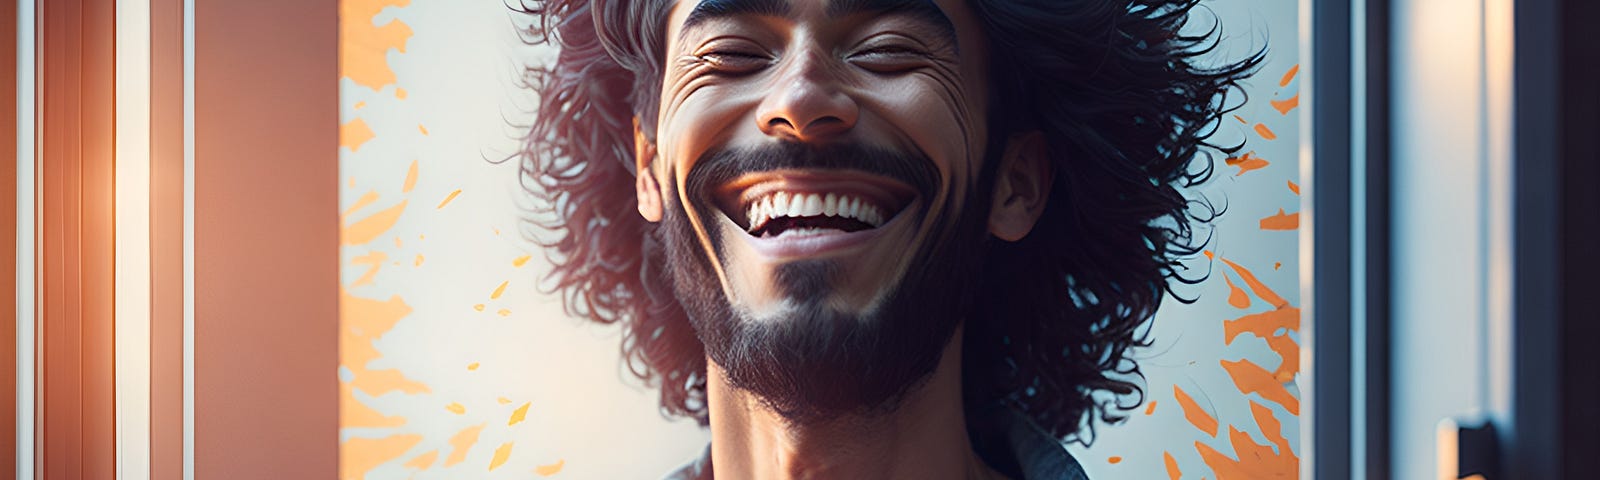 AI-generated image of a smiling man radiating energy, calm, and joy